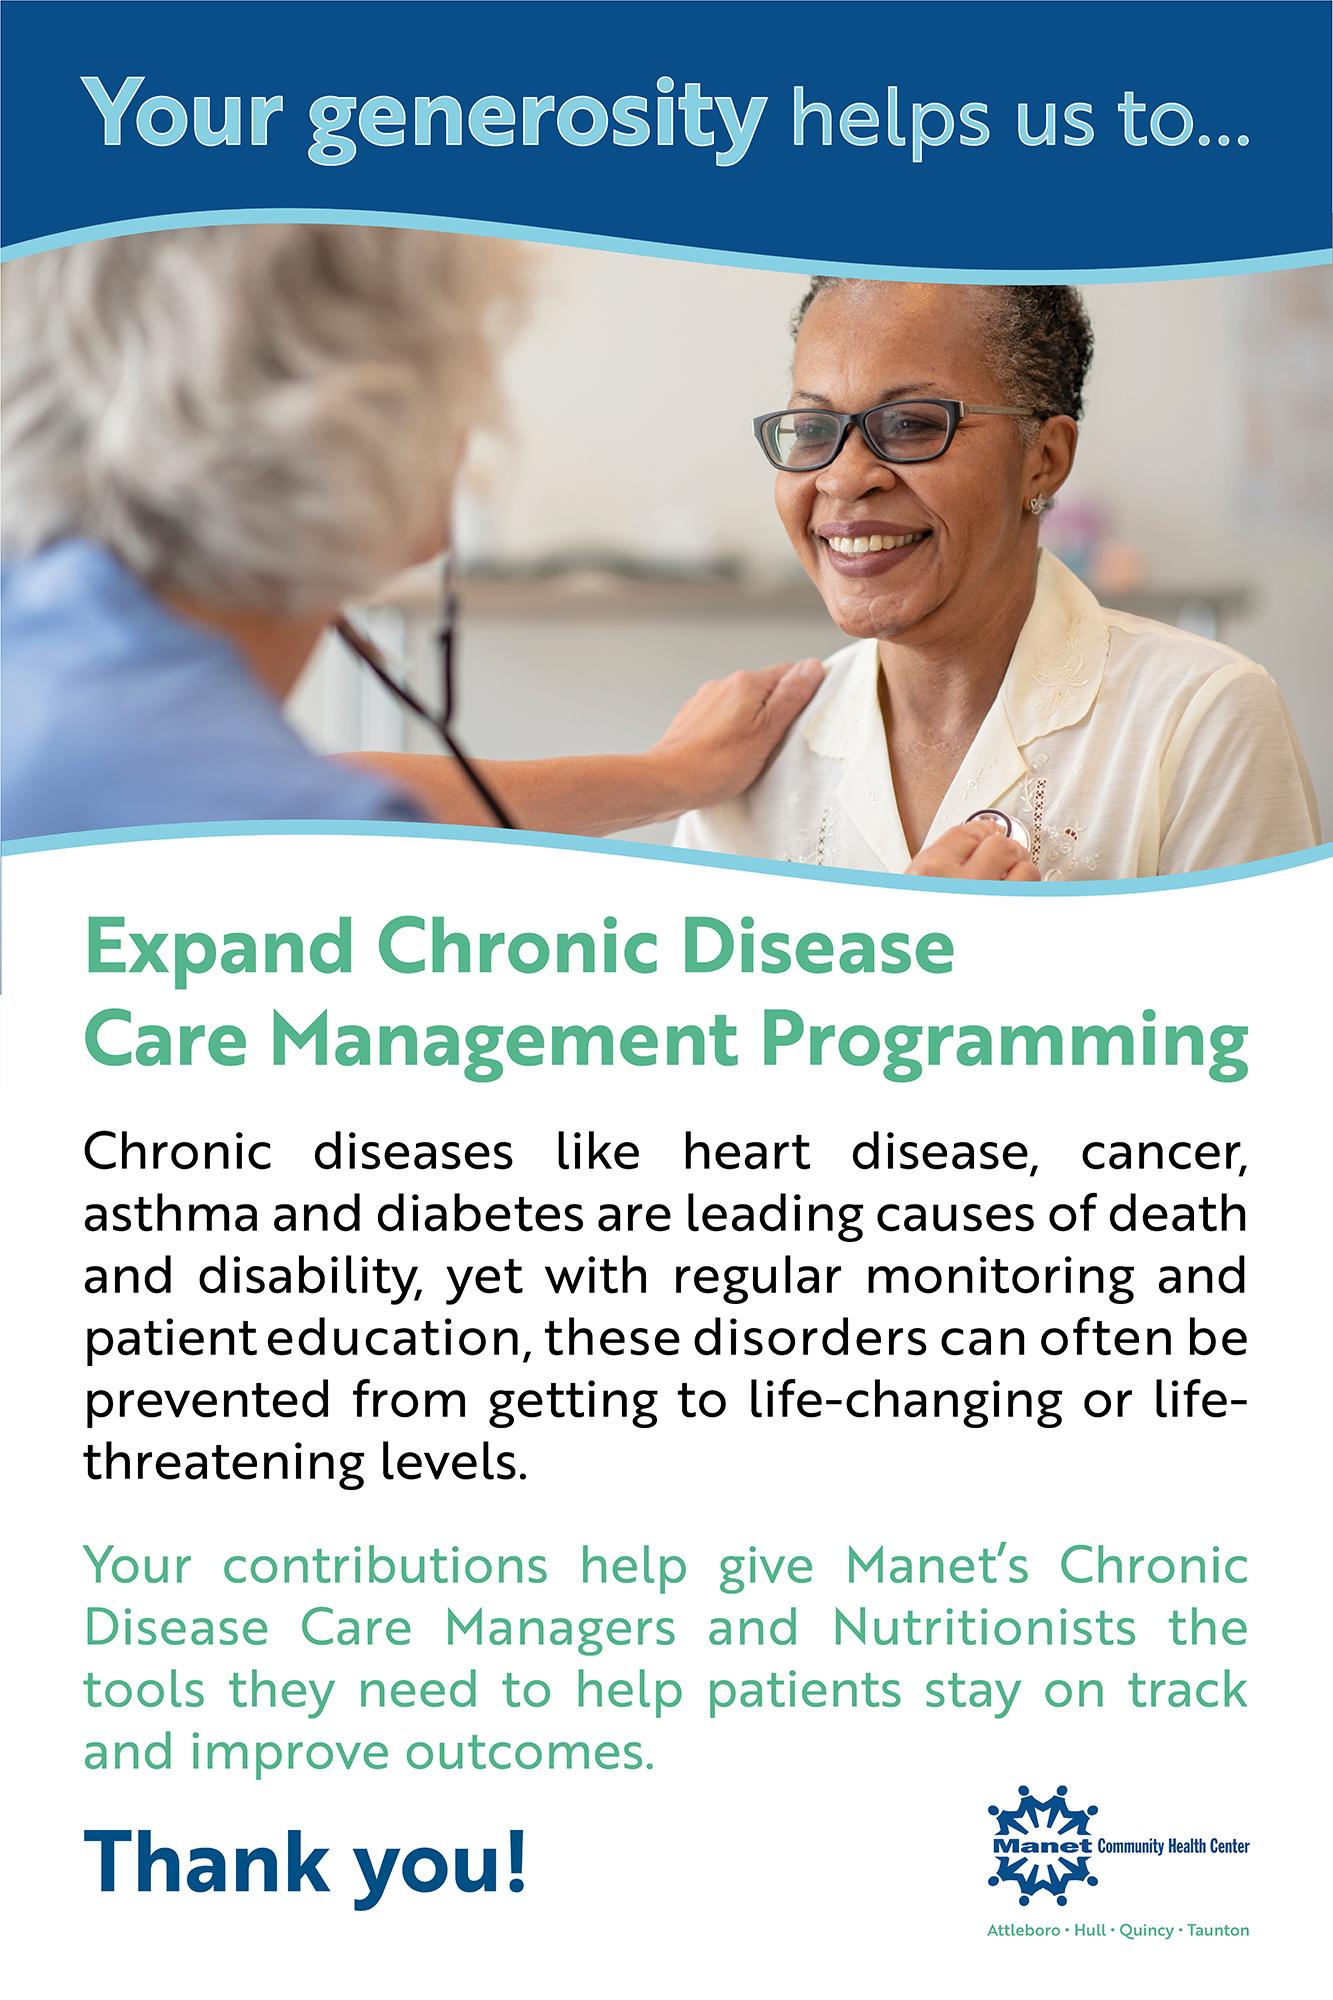 Expand Chronic Disease Care Management Programming